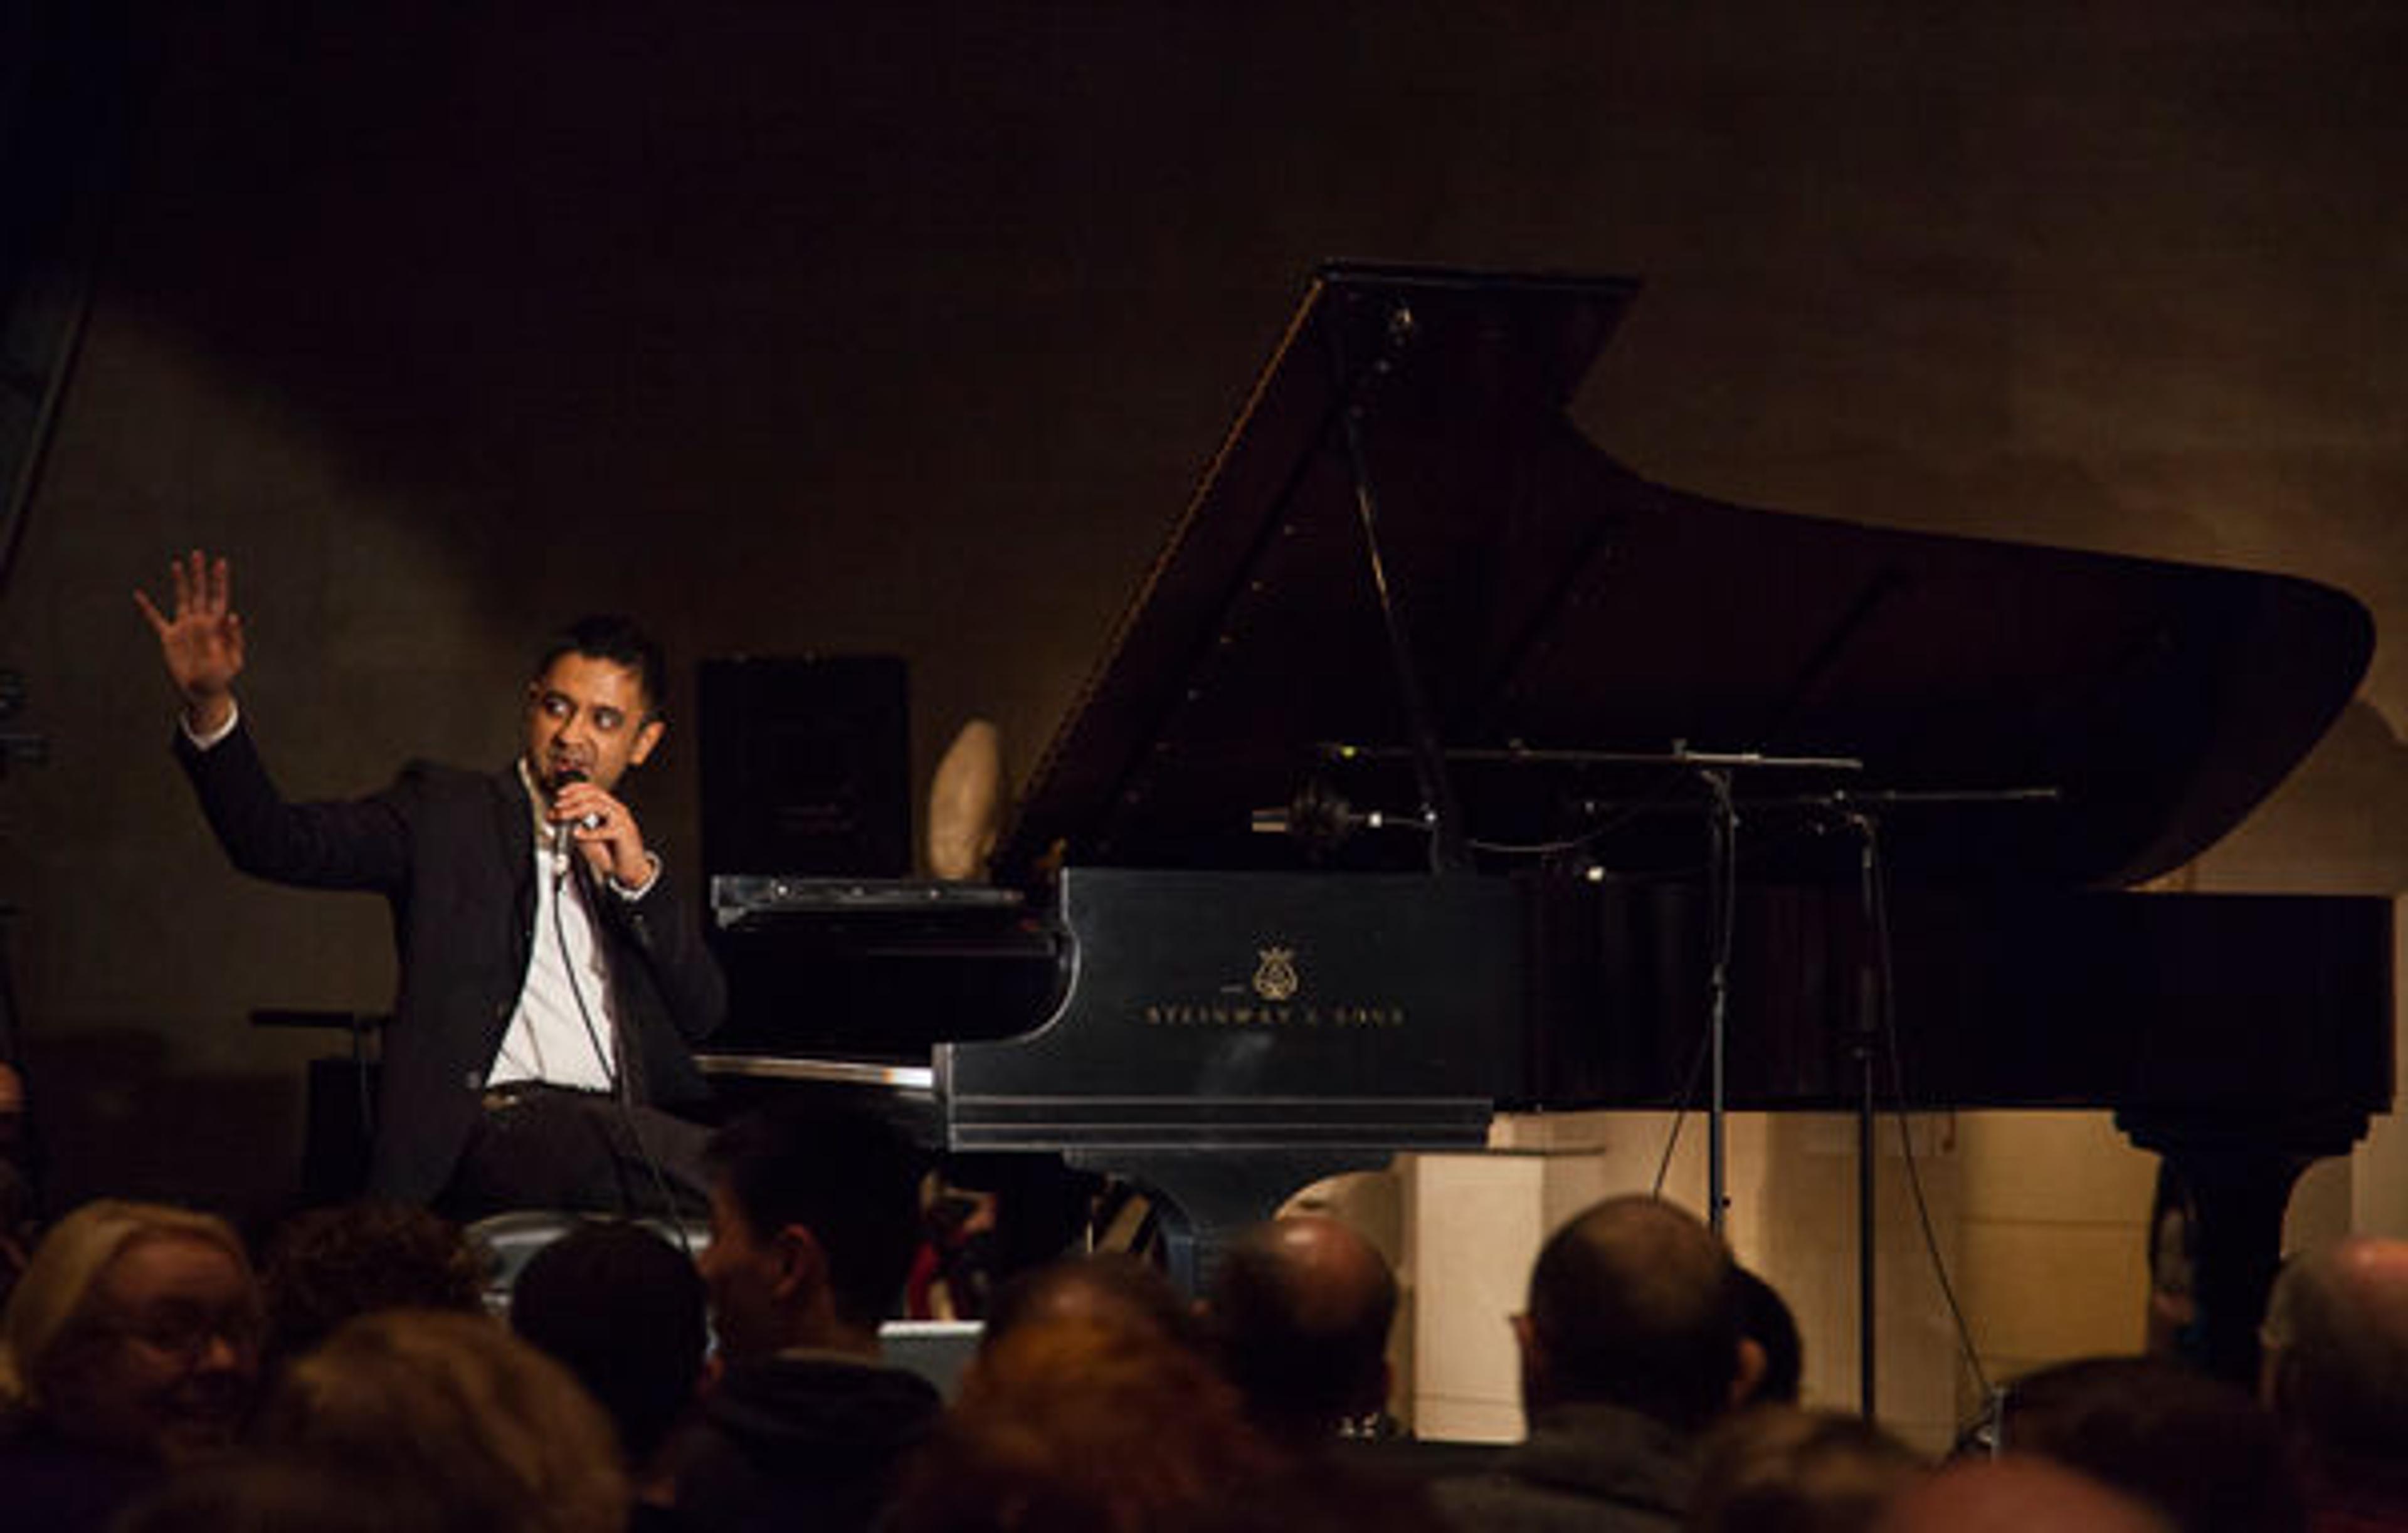 Vijay Iyer performs in The Temple of Dendur in The Sackler Wing, March 2015. Photo by Anja Hitzenberger